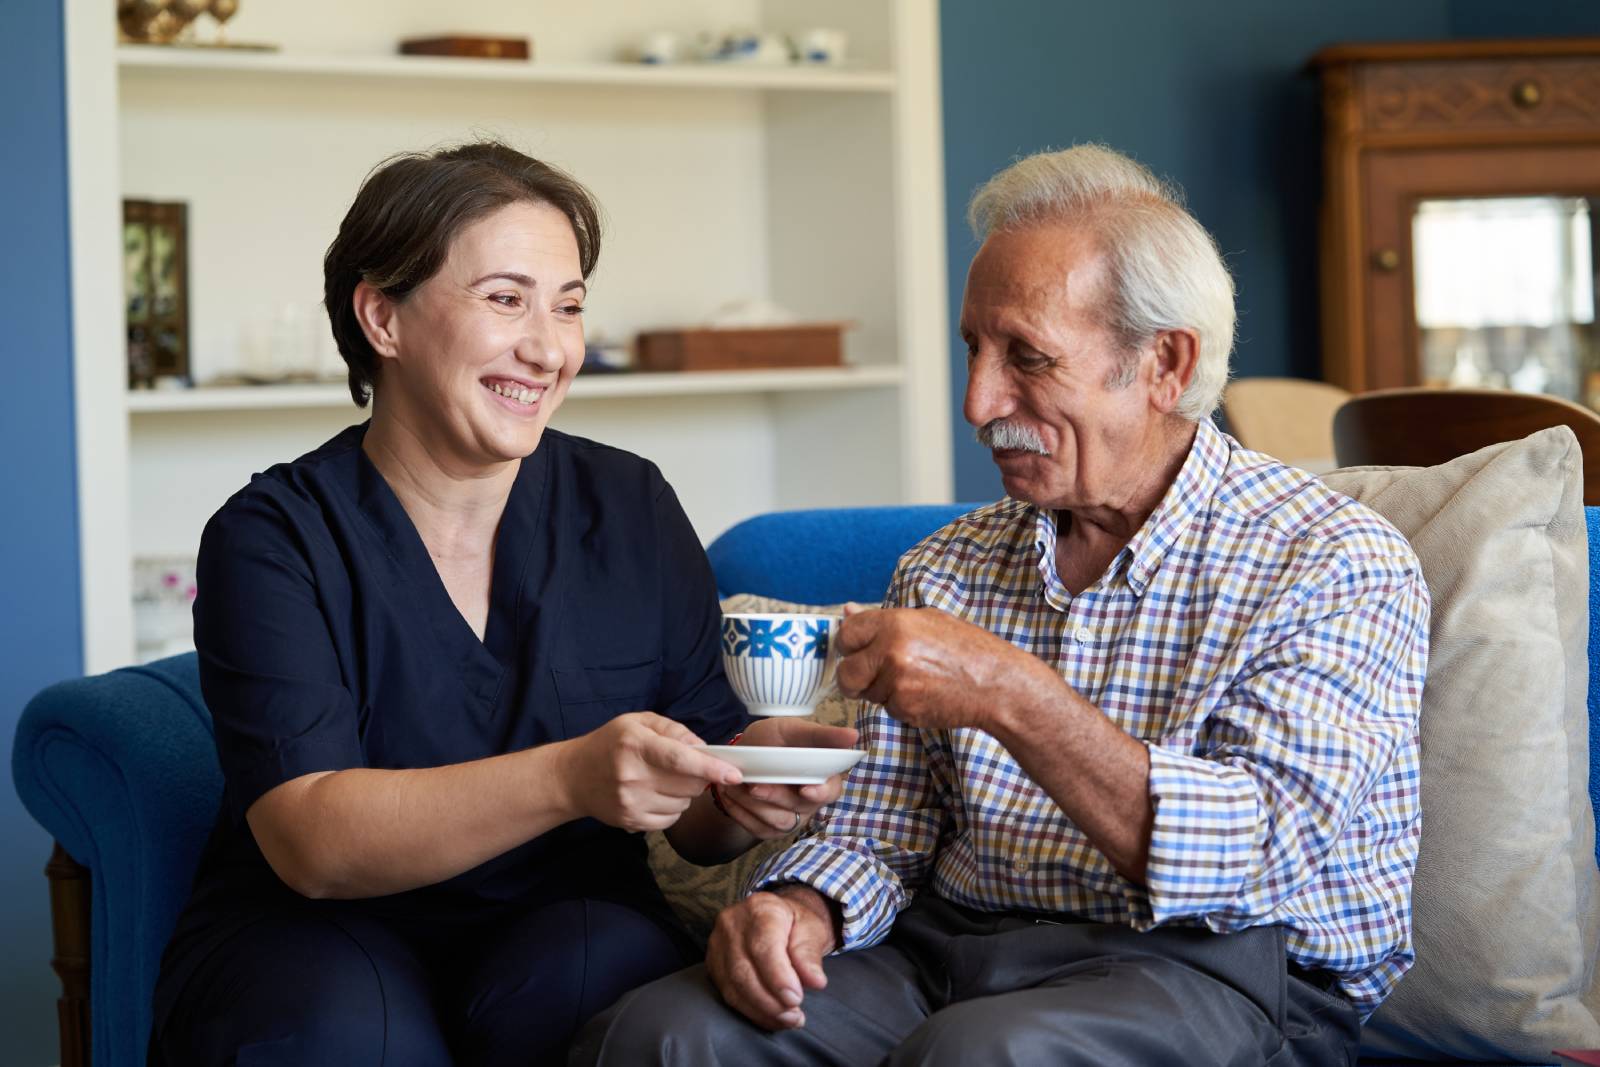 A caregiver sitting on a couch drinking tea with a senior.